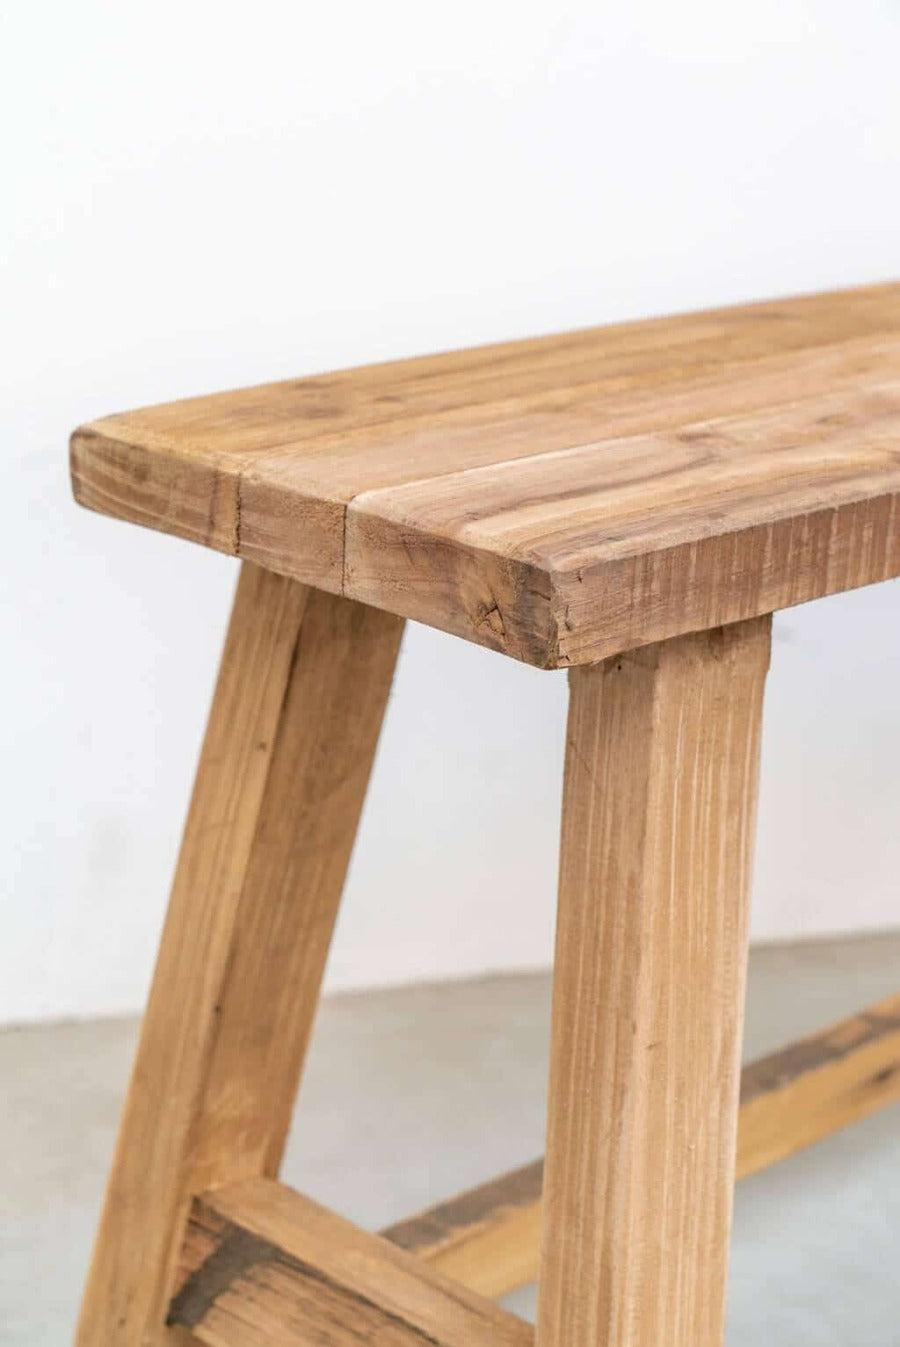 Recycled wooden stool